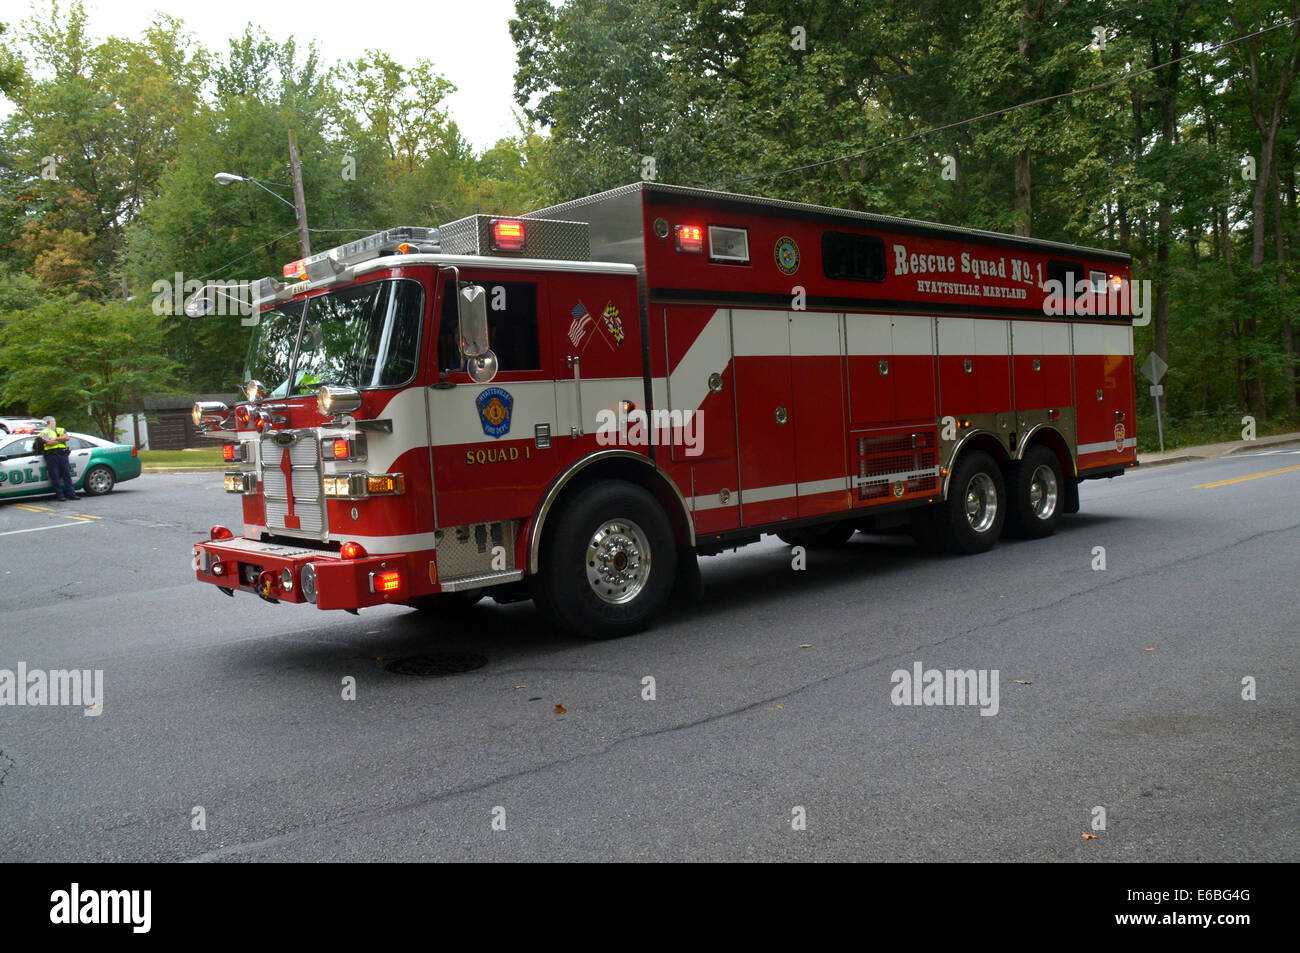 Heavy Duty Rescue Squad from Hyattsville Volunteer Fire Department on a emergency call Stock Photo